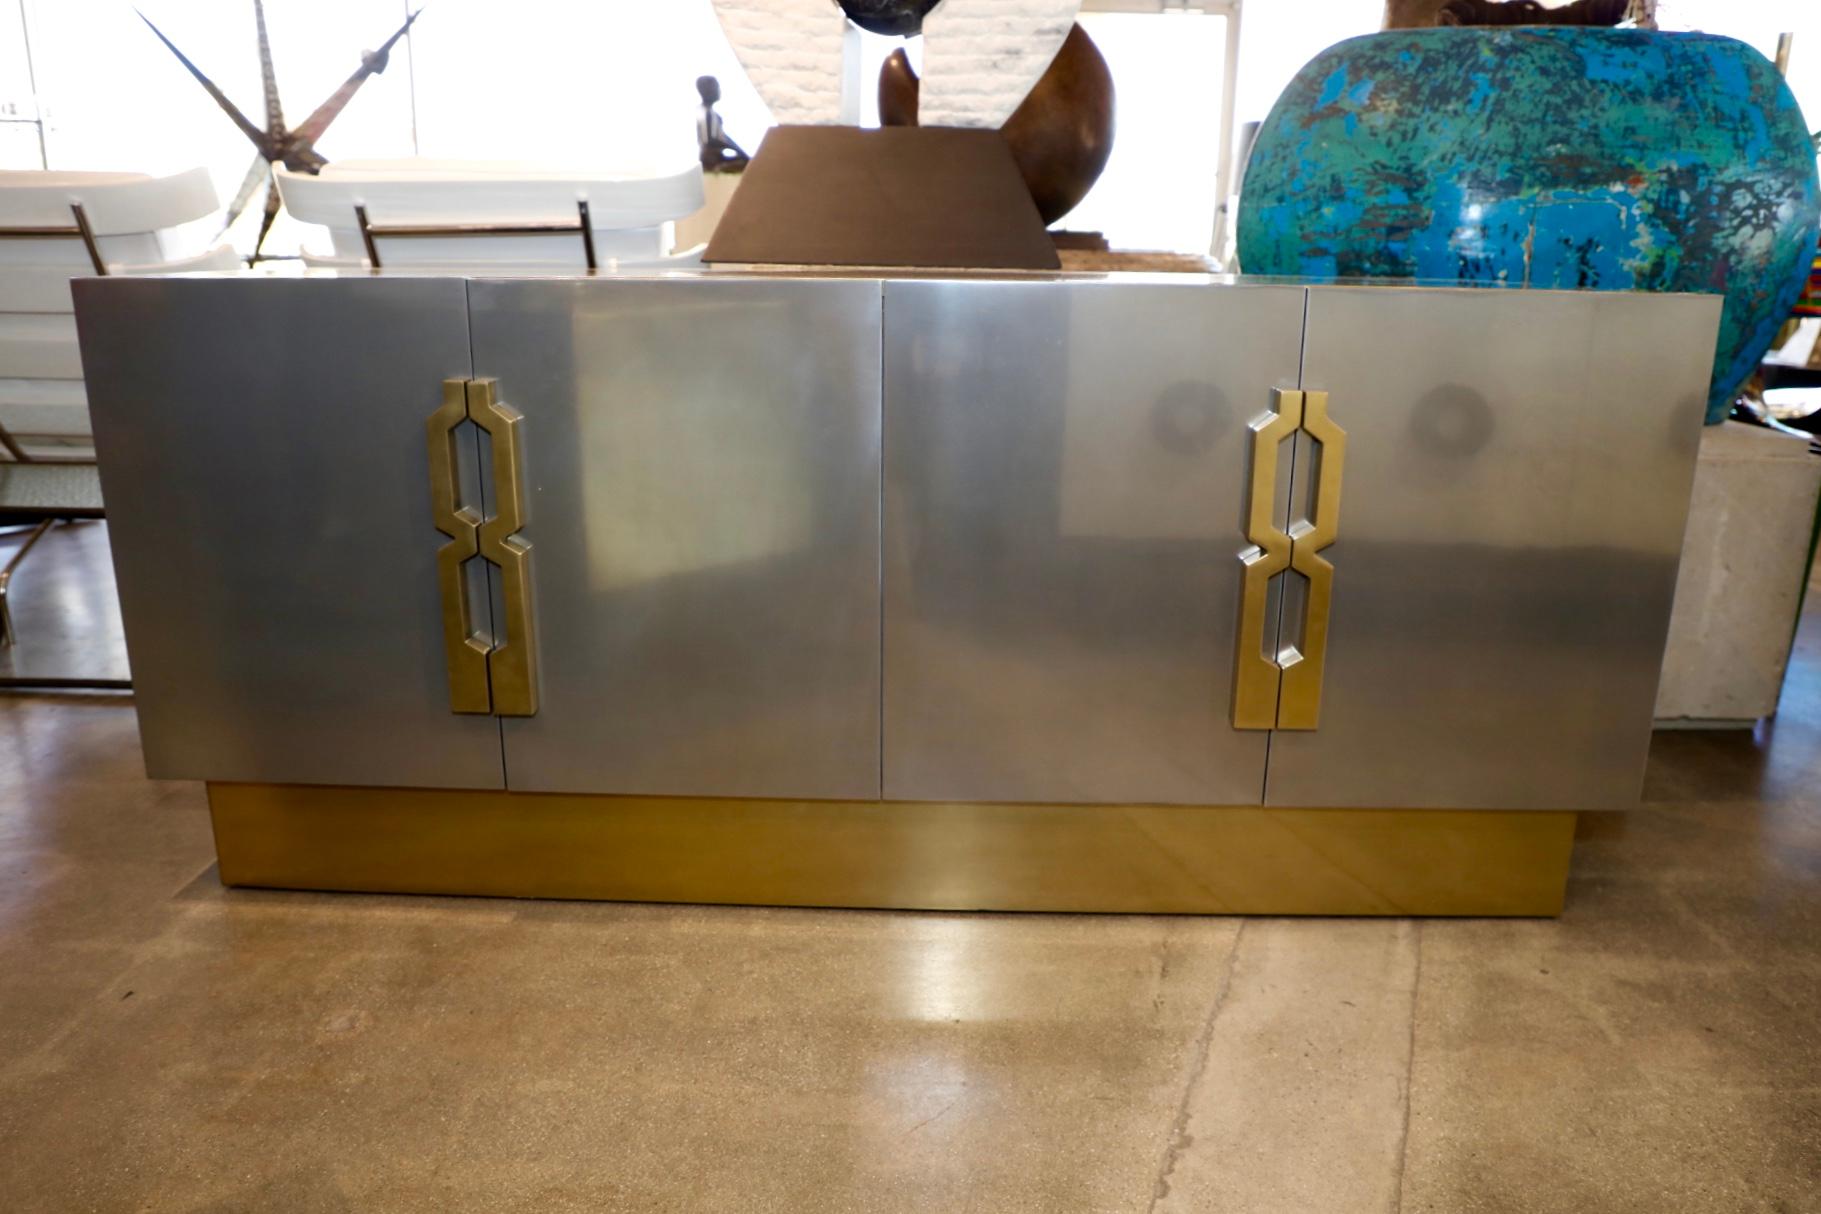 Our originals credenza designed and created by Marco Antonio. This credenza is coated in stainless and brass. One shelf in each side. The credenza is well made but has minor imperfections as it is handmade.